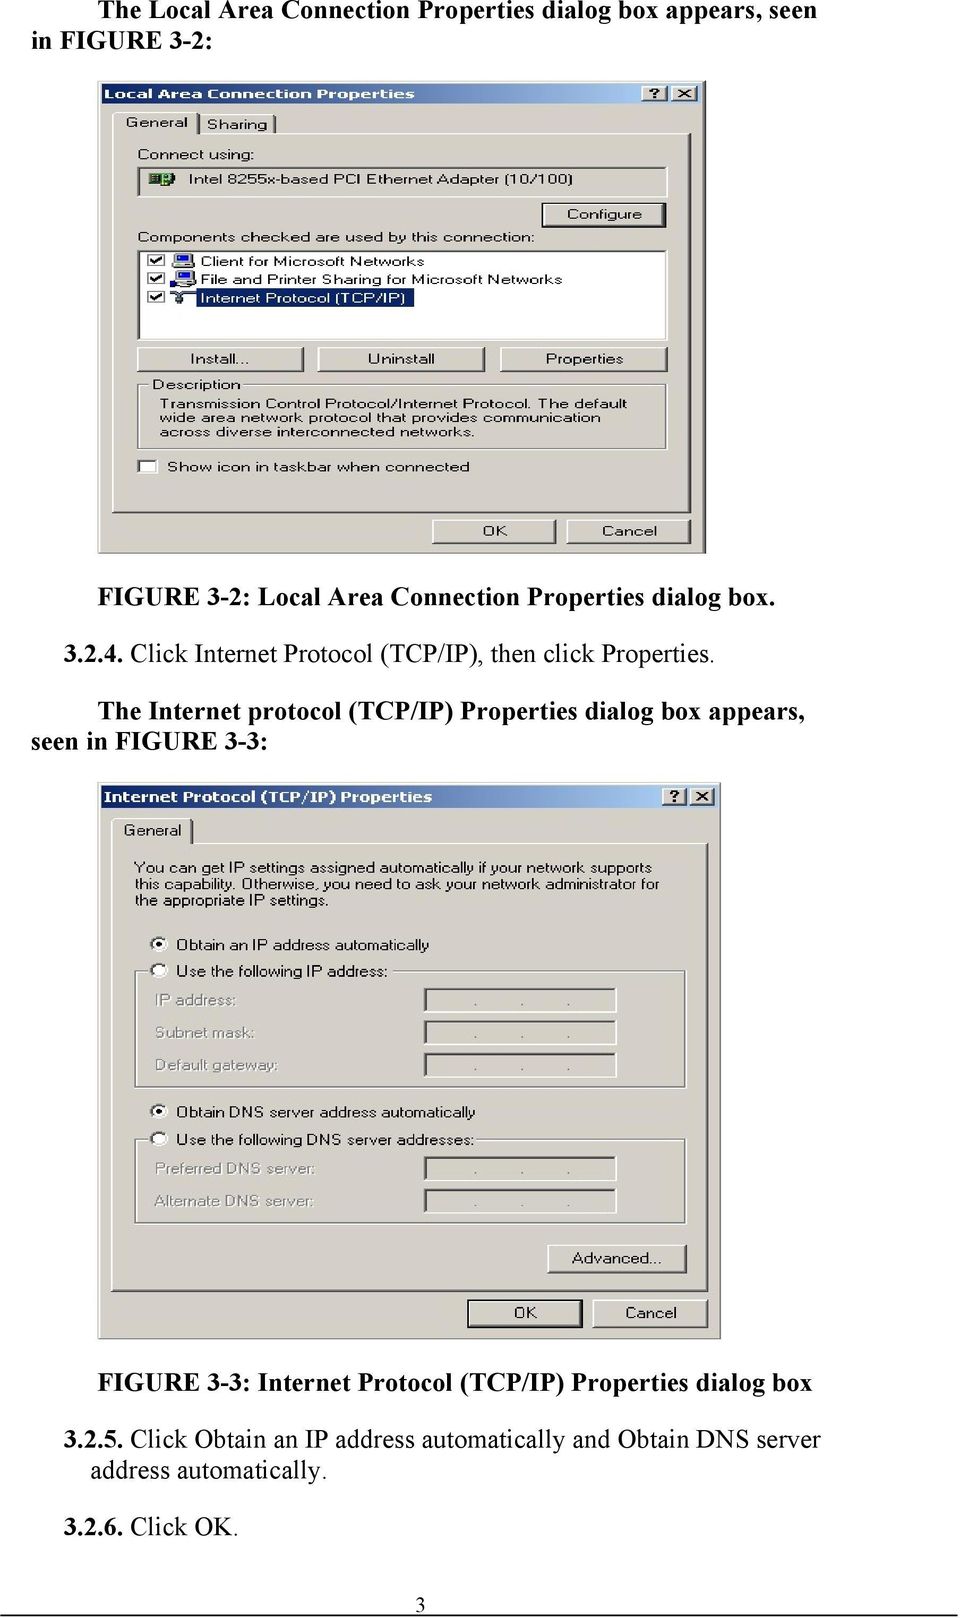 The Internet protocol (TCP/IP) Properties dialog box appears, seen in FIGURE 3-3: FIGURE 3-3: Internet Protocol